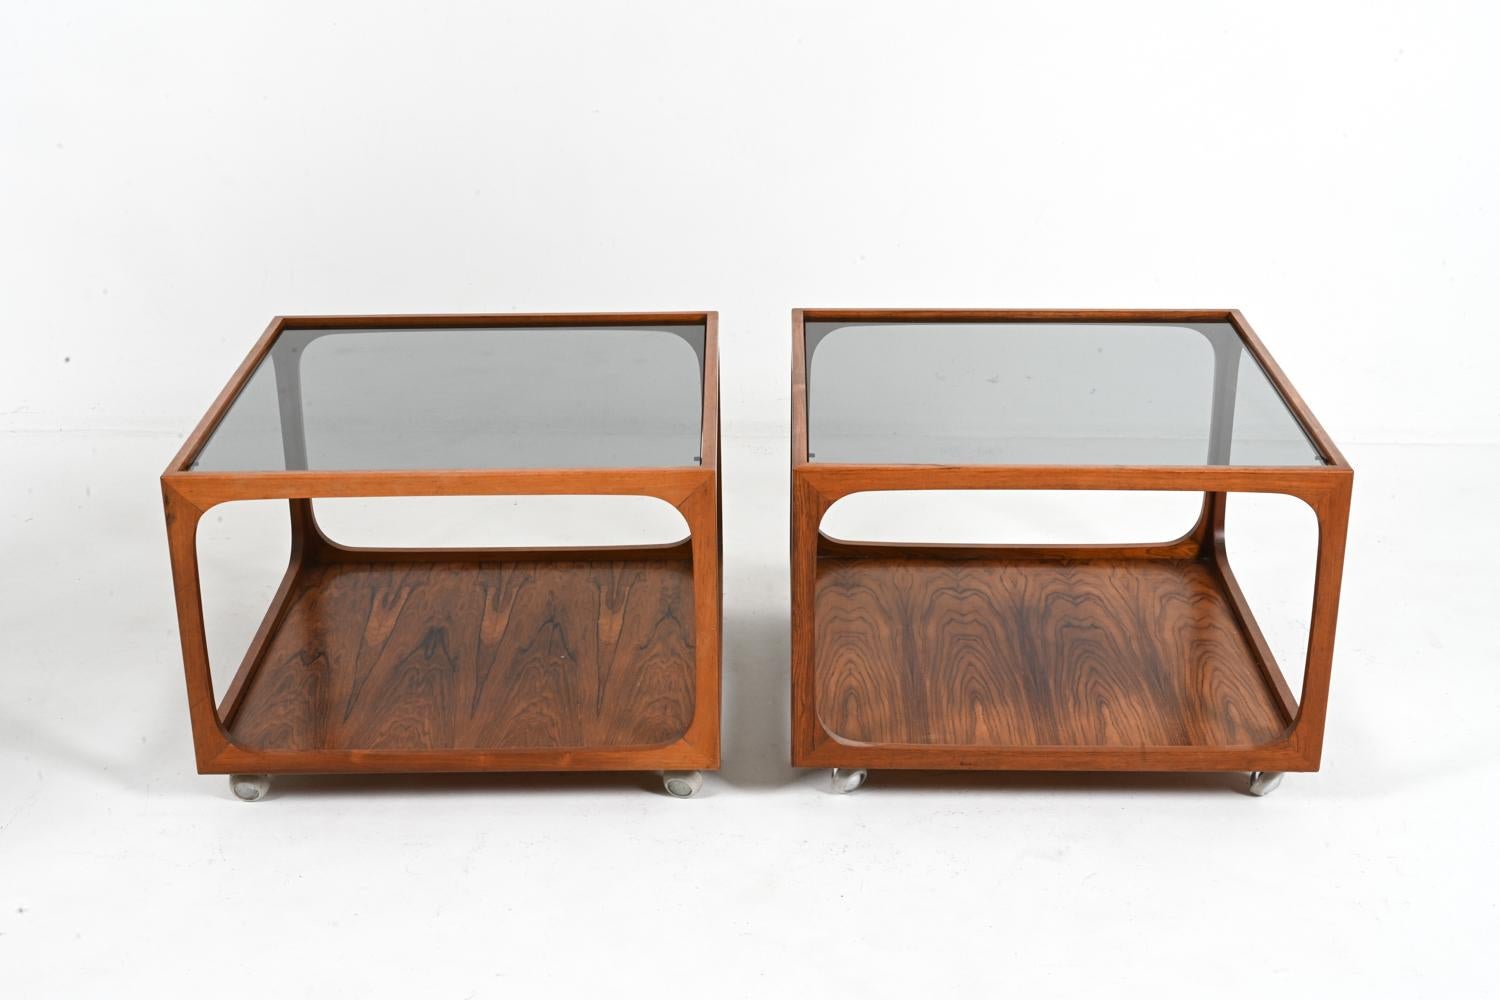 Rare Pair of Rosewood & Smoked Glass Cube End Tables Attributed to Wilhelm Renz For Sale 1